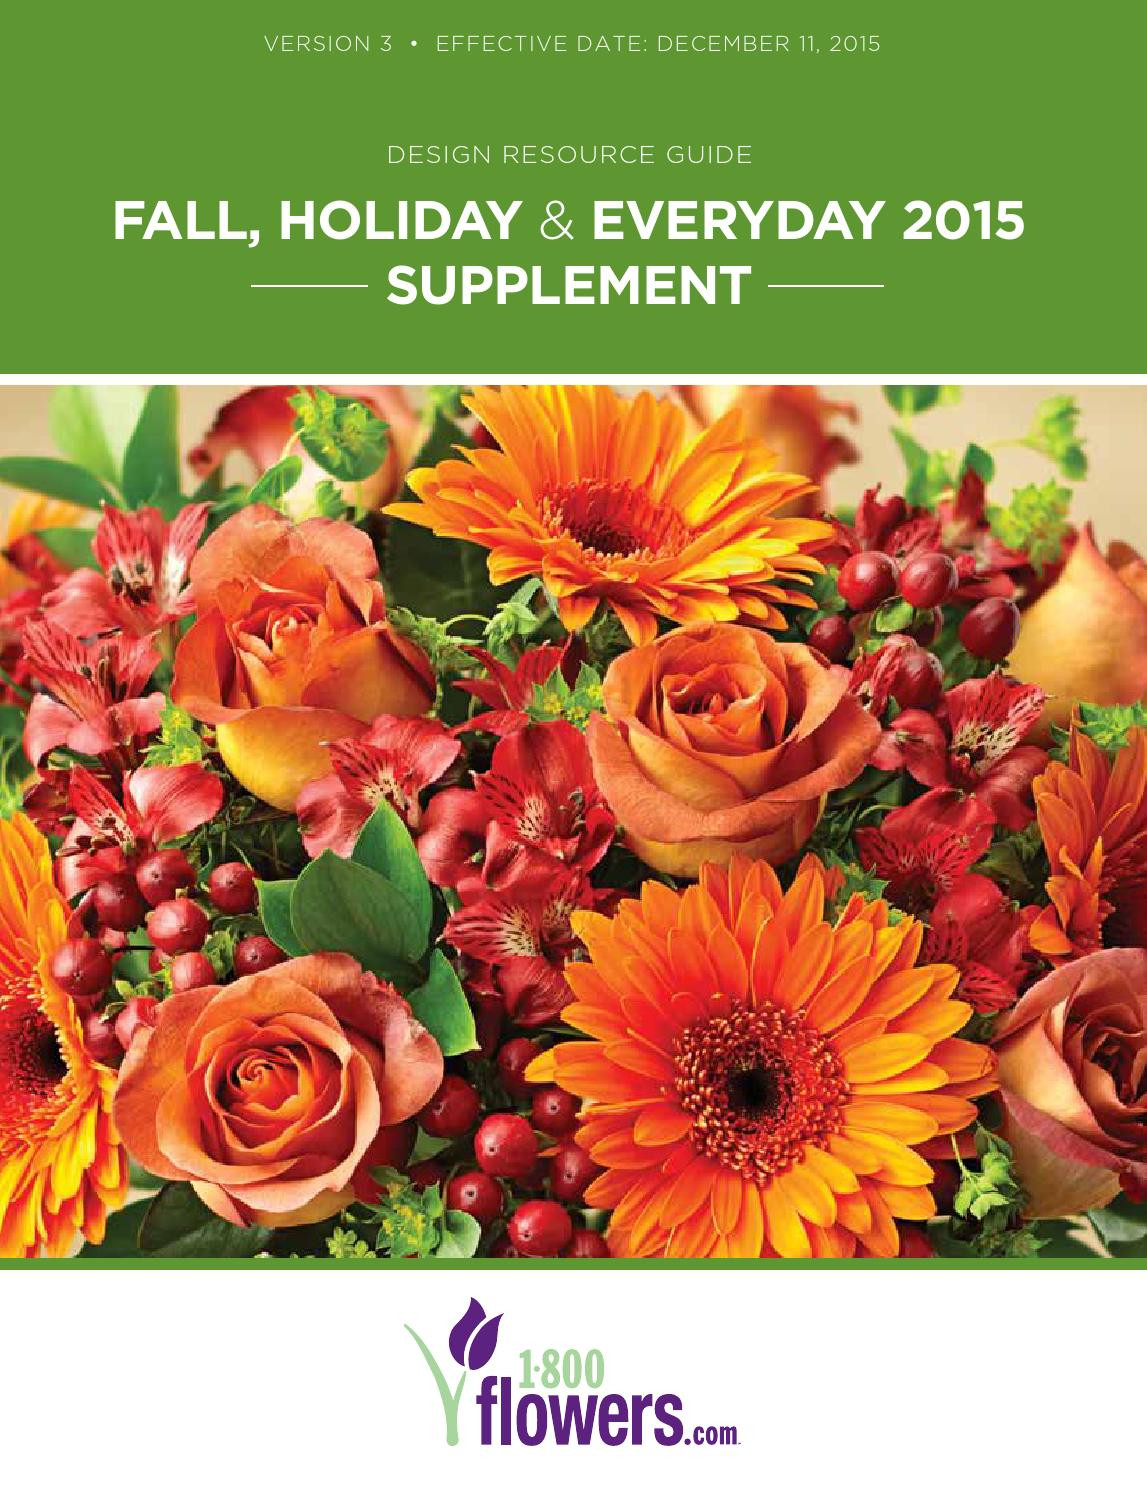 18 Fashionable Waterford 10 Inch Vase 2024 free download waterford 10 inch vase of 2015 fall holiday everyday design resource guide supplement by throughout 2015 fall holiday everyday design resource guide supplement by bloomnet issuu